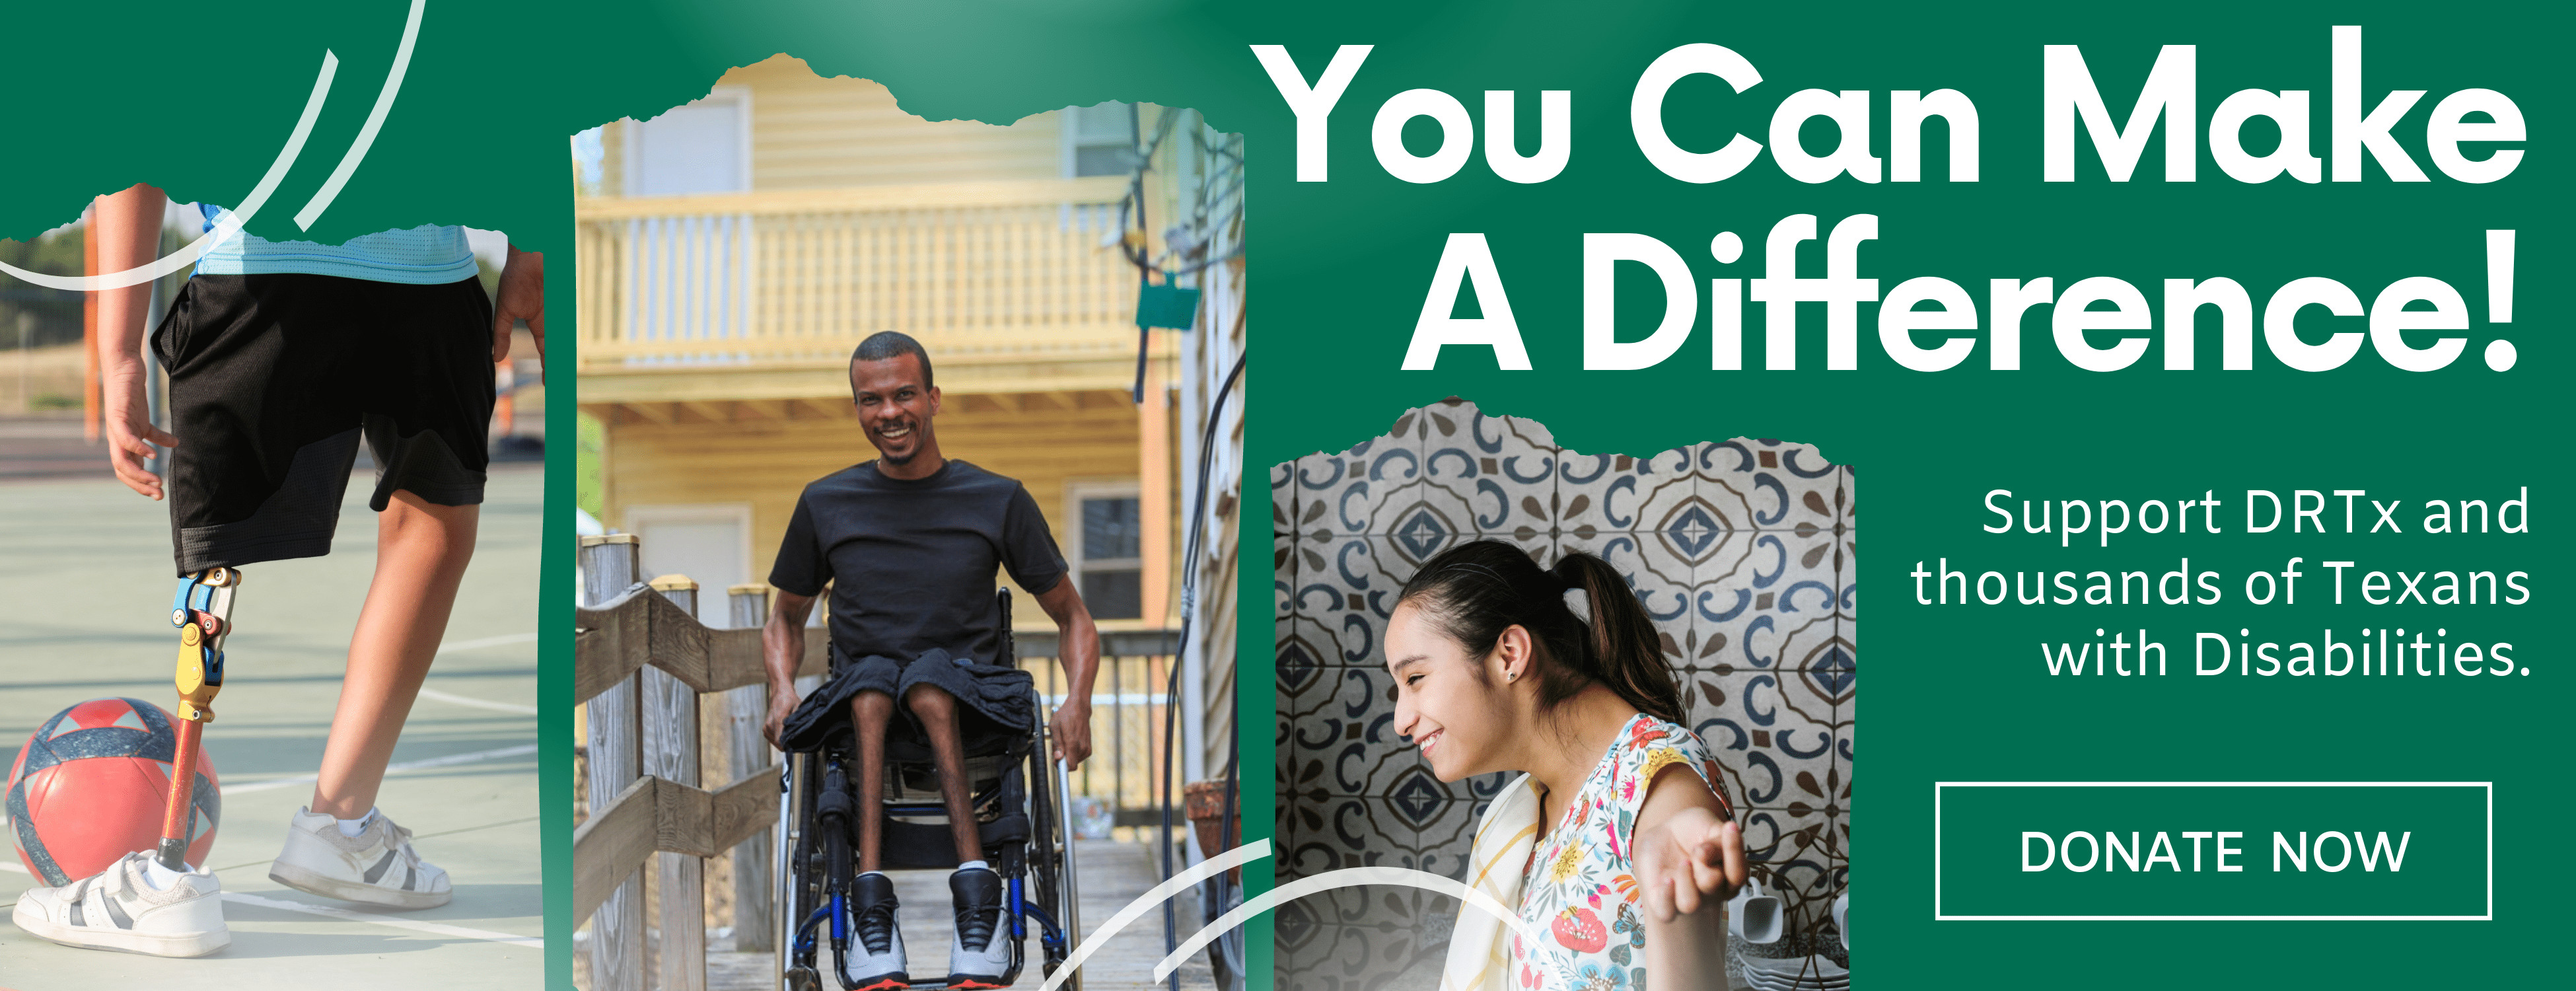 Donate now so you can make a difference by supporting DRTx and thousands of Texans with disabilities.